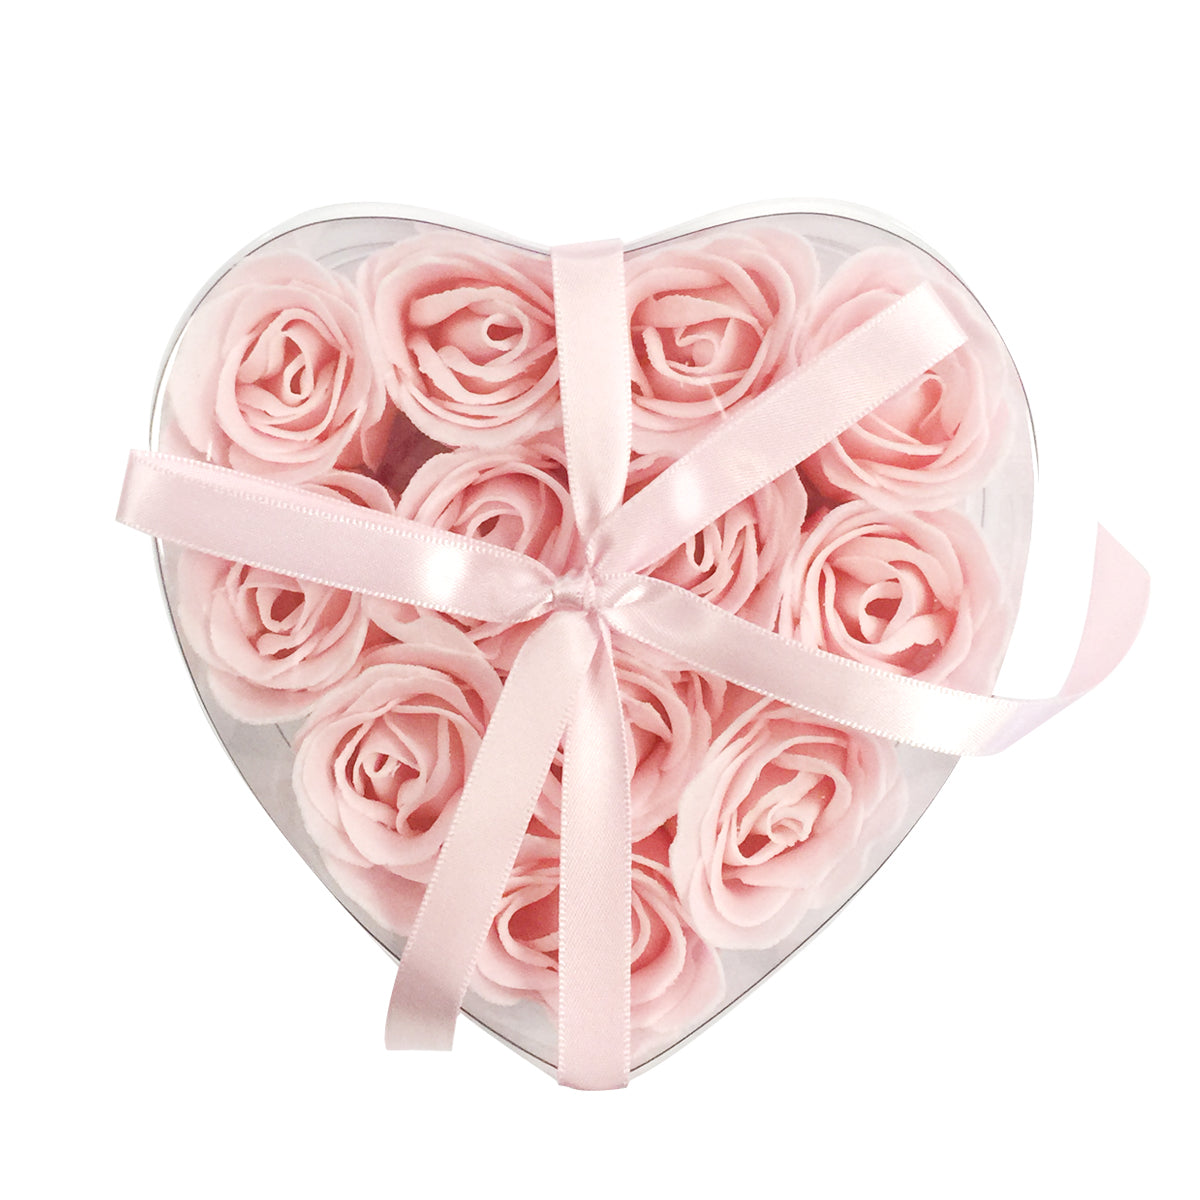 Wrapables Scented Rose Soaps (Set of 12)